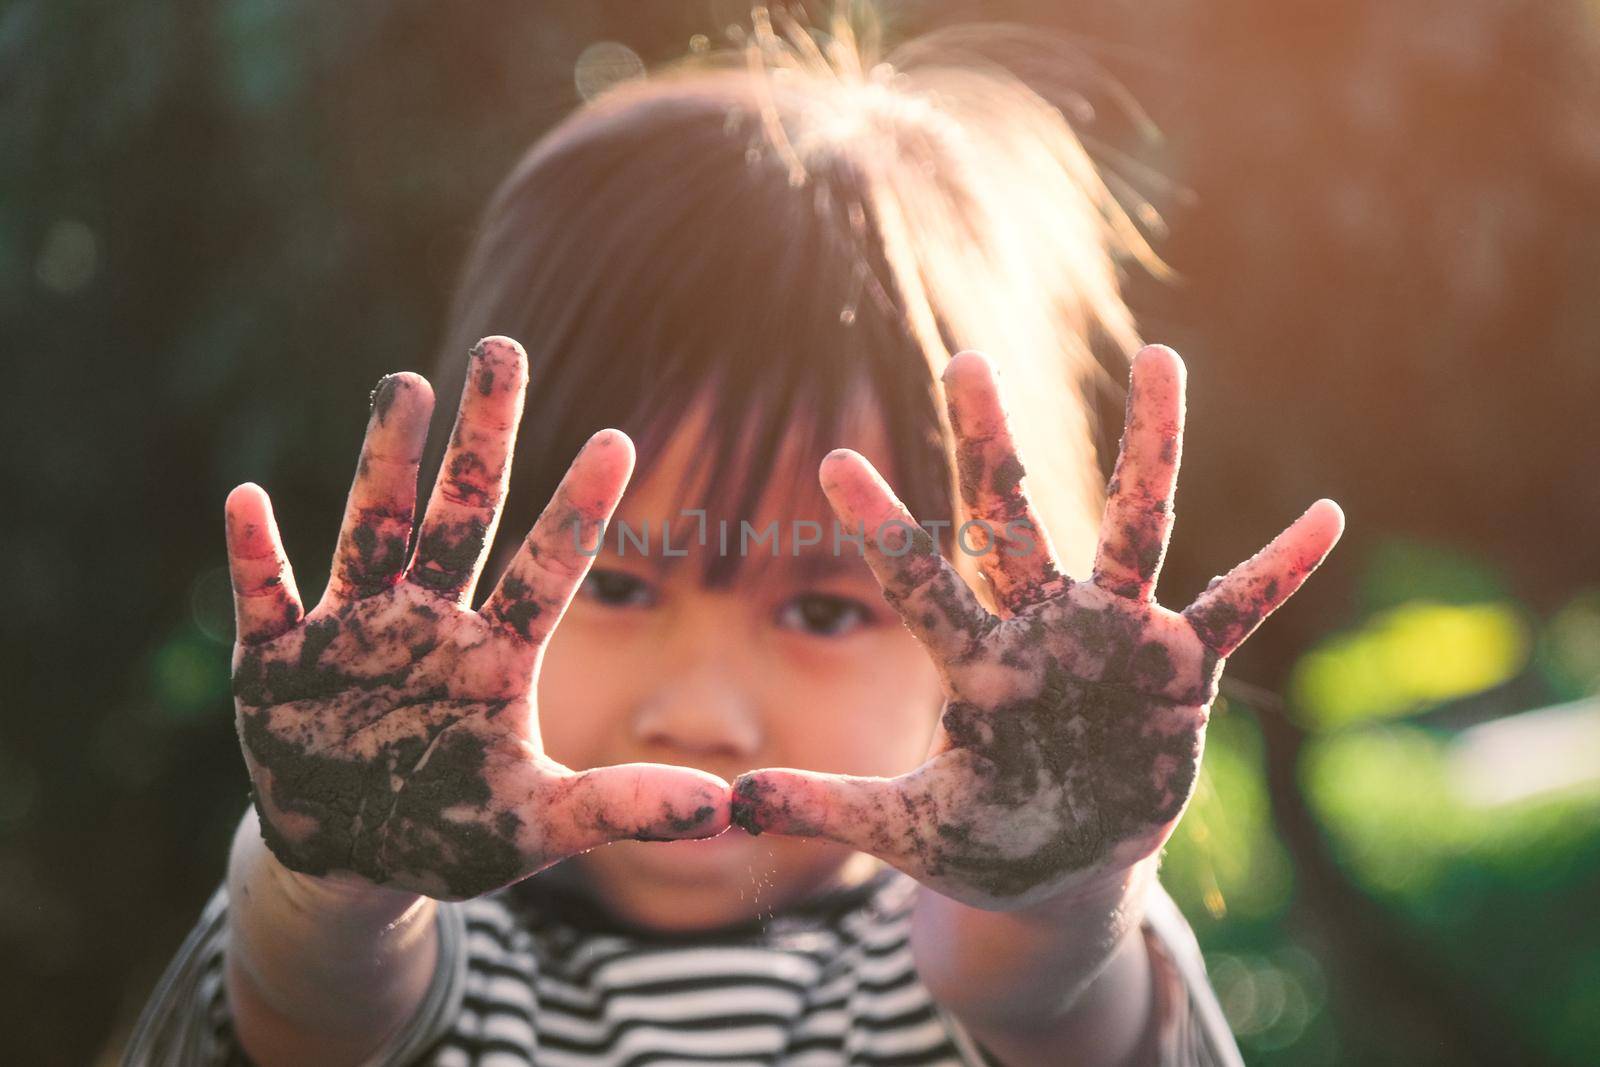 Cute little girl smiles and shows off her muddy hands while planting trees in the backyard. Educational concept outside the school fence.